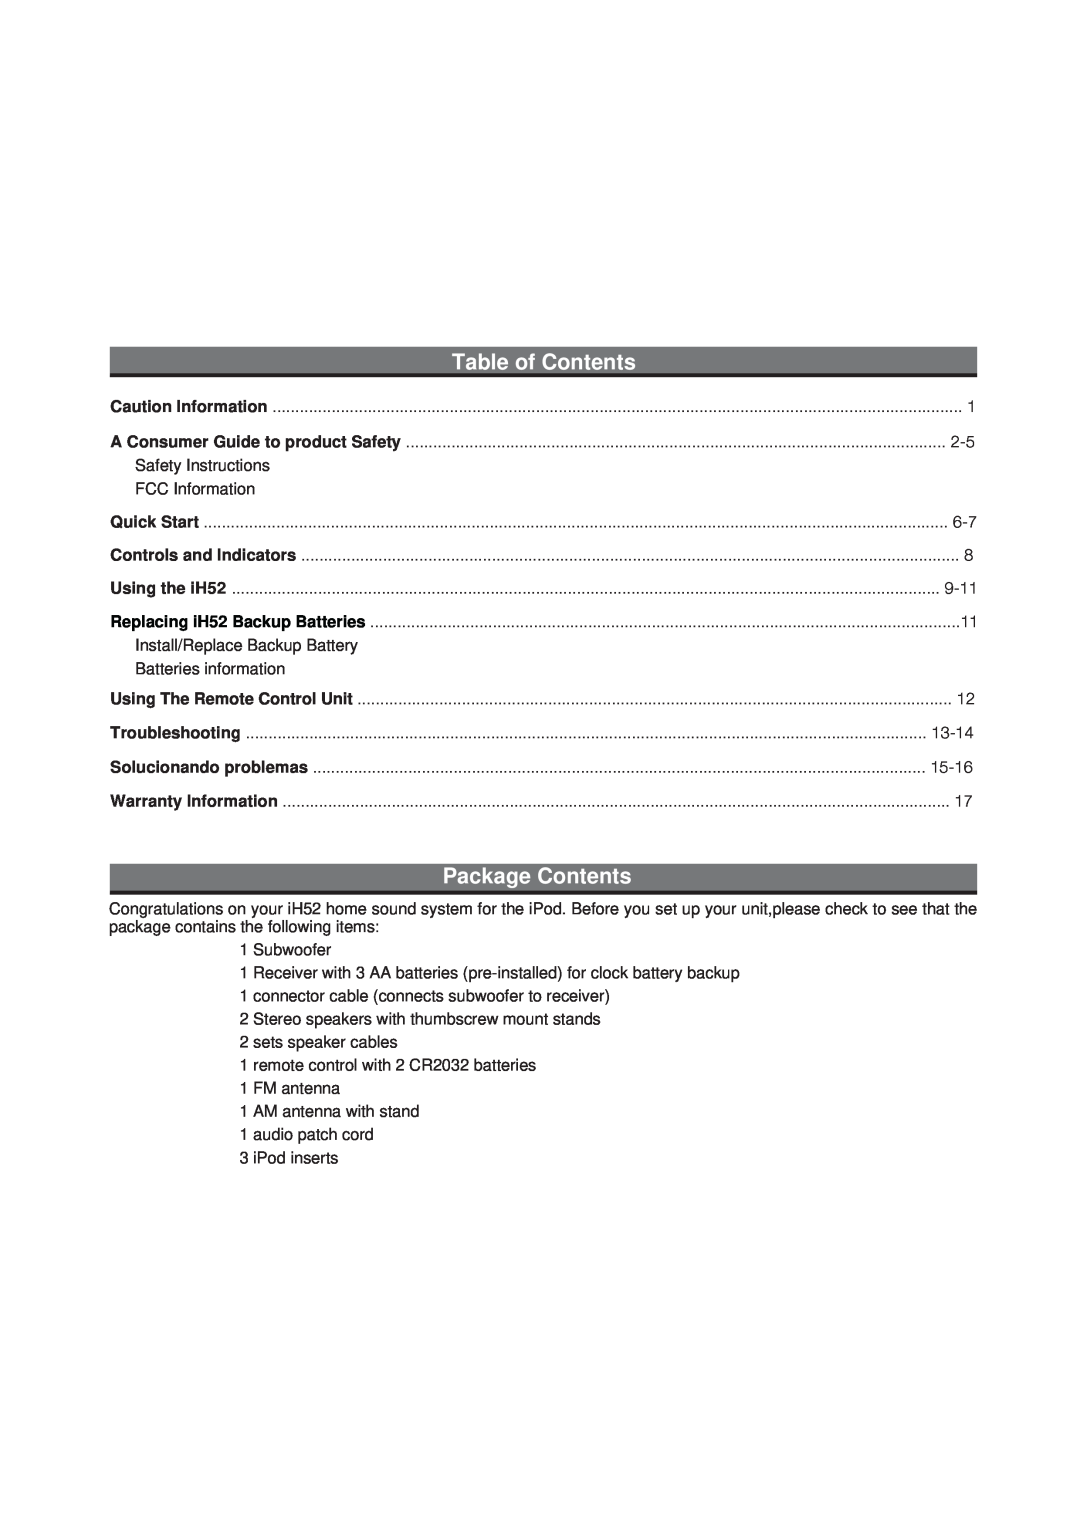 iHome IH52 manual Table of Contents, Package Contents 